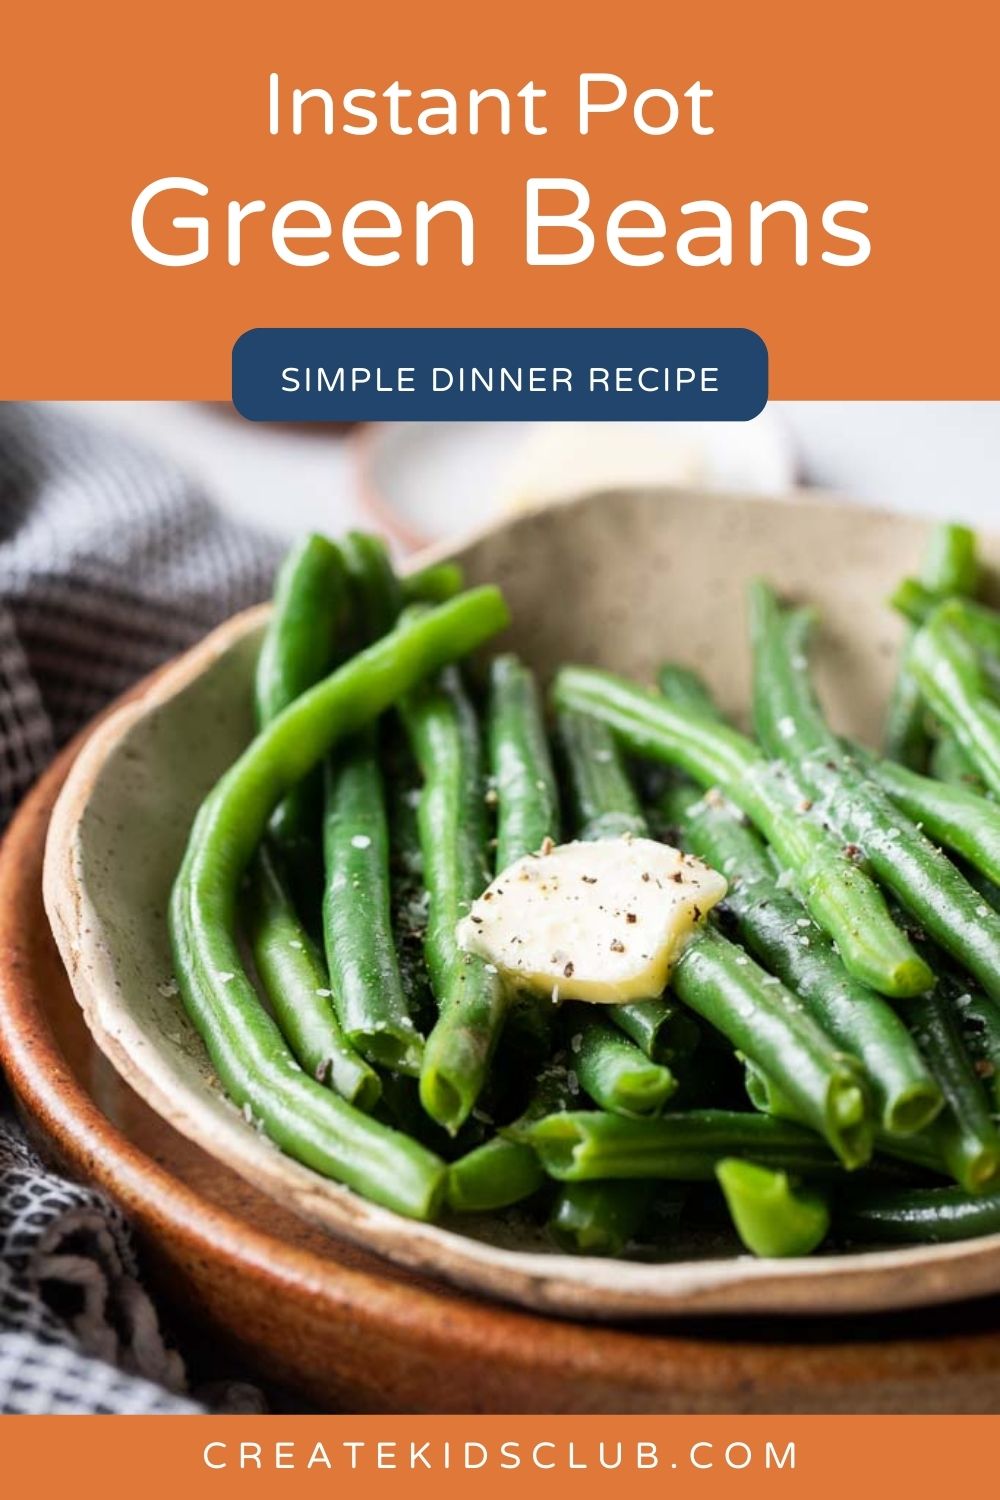 Pin of instant pot green beans shown in a bowl.